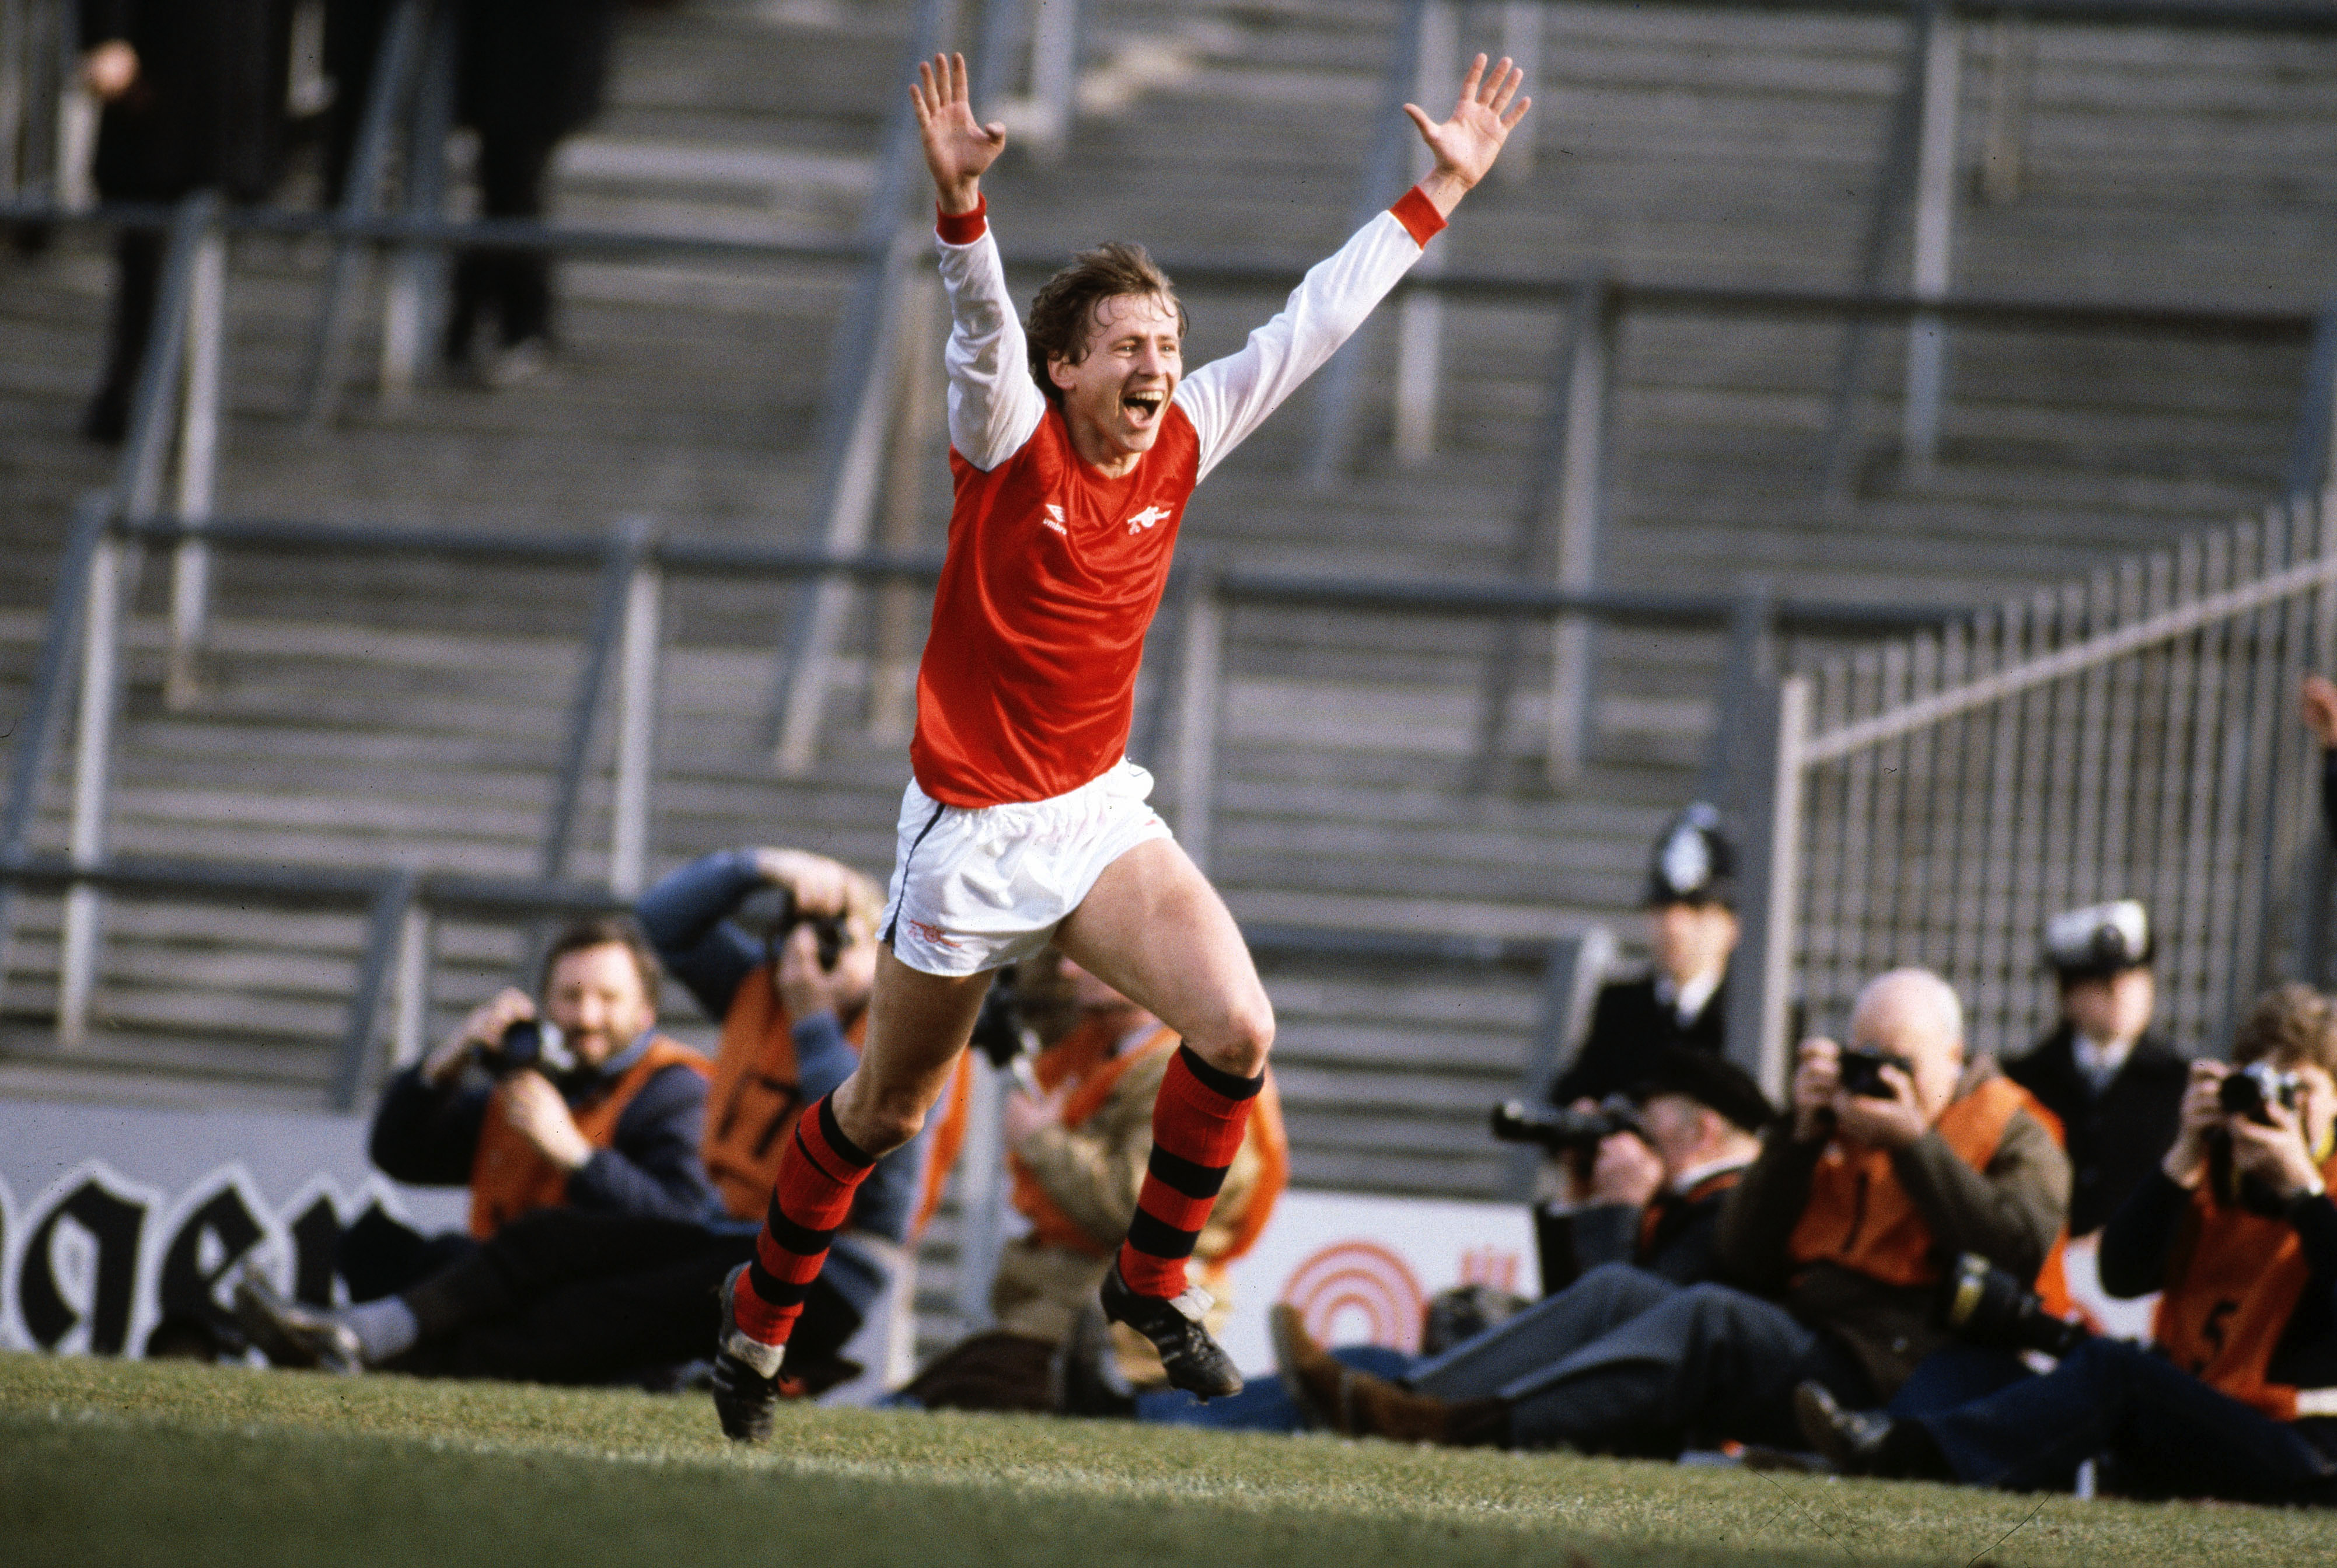 Rewind: On this day in 1983 Vladimir Petrovic shone as Arsenal beat Aston Villa in FA Cup quarter final at Highbury 